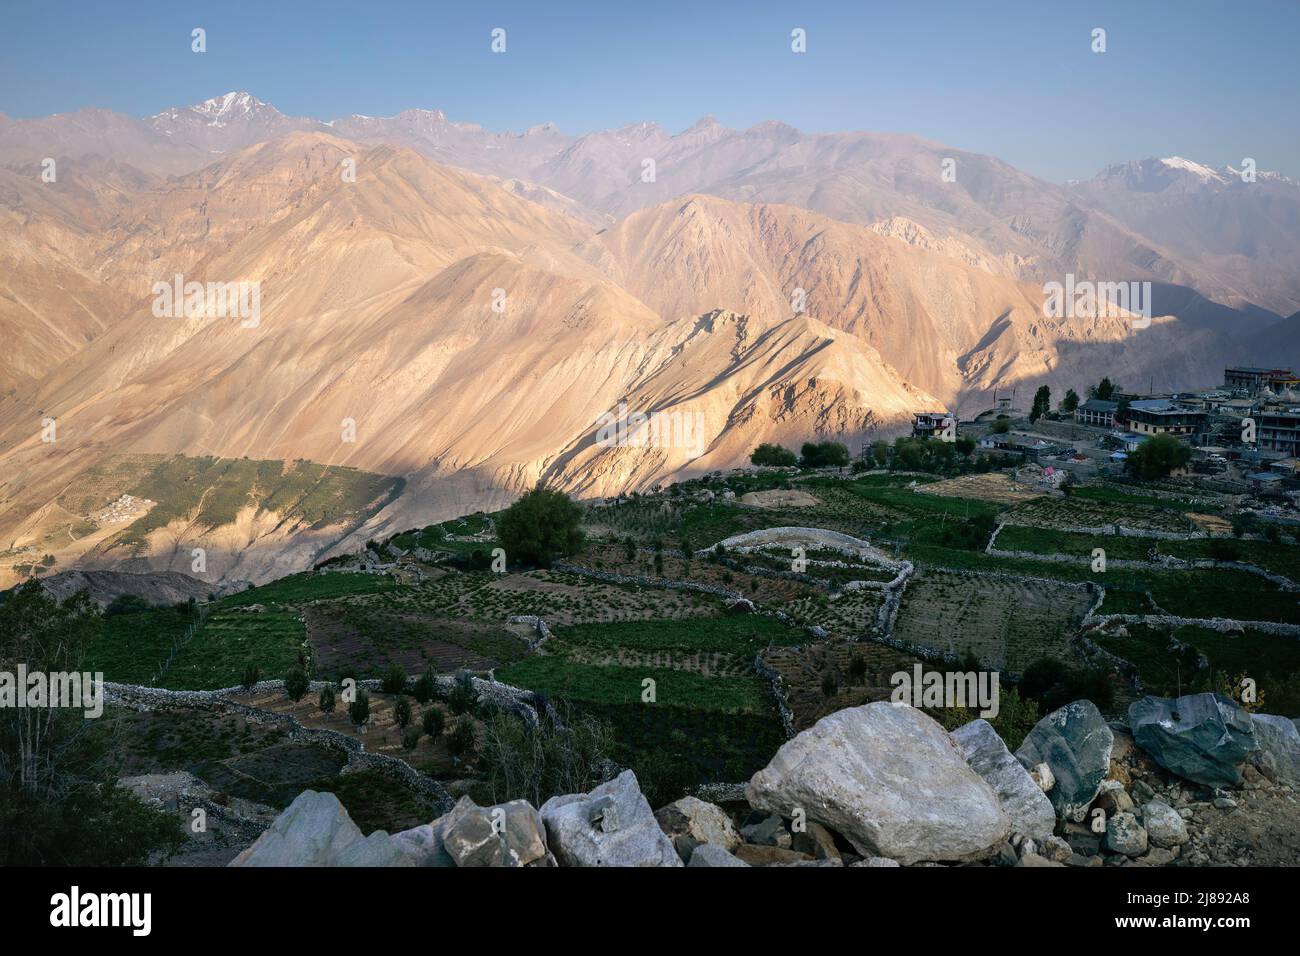 Elevated view of terraced fields with crops and dry stone walls against steep slopes and peaks of Himalayas under blue sky viewed from Nako, India. Stock Photo